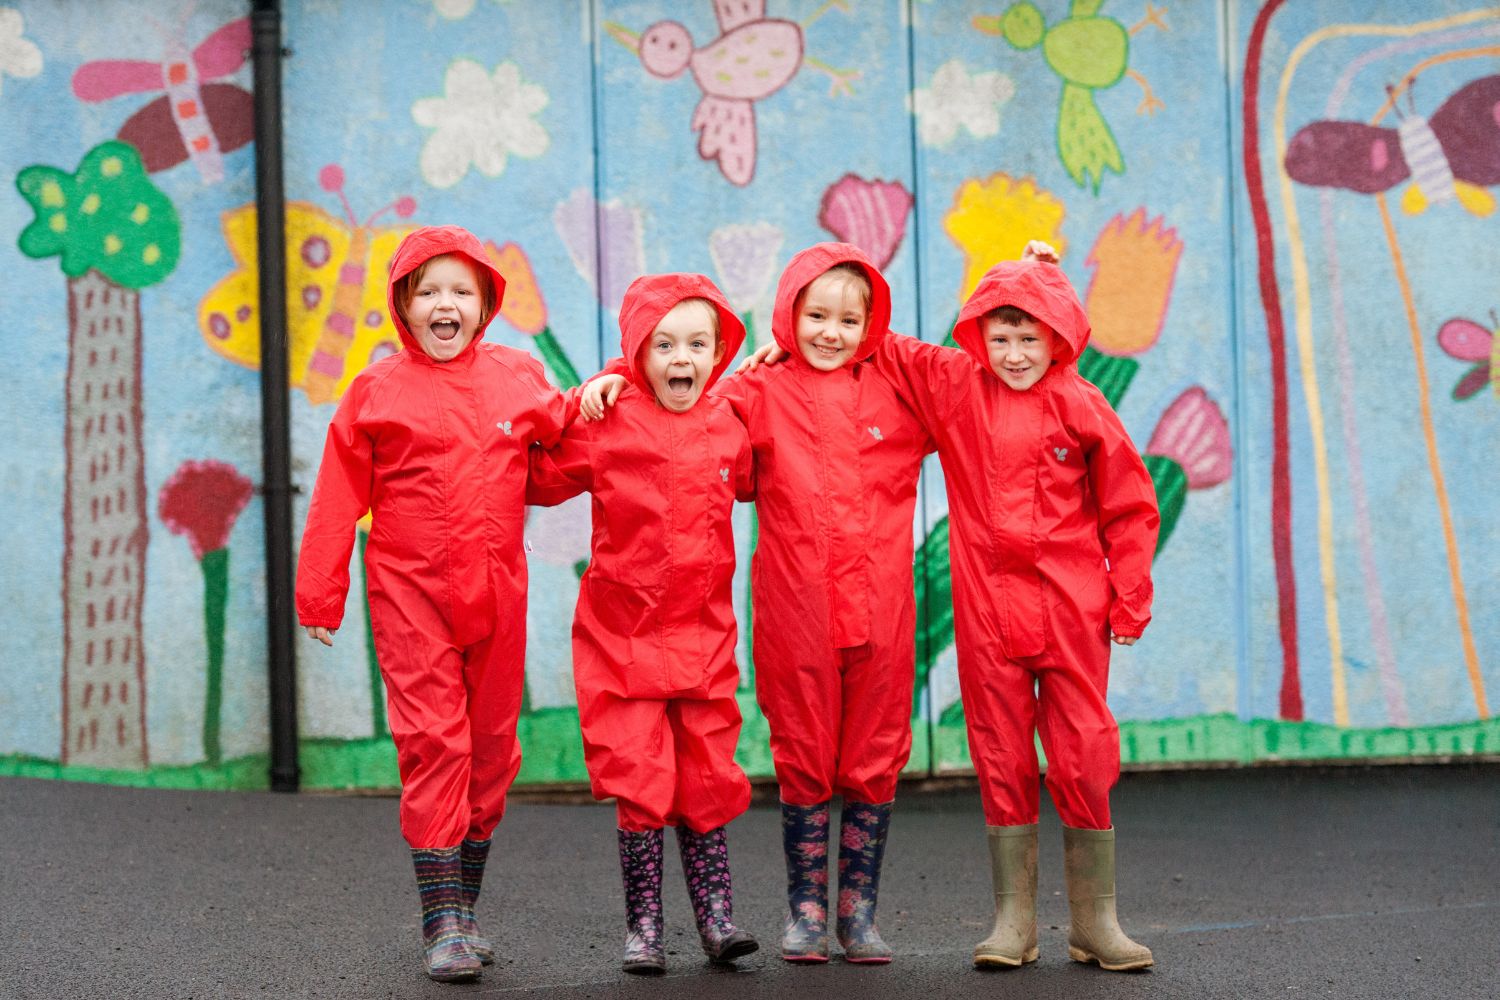 Children wearing bright red waterproof coveralls laughing in their rainy school grounds.